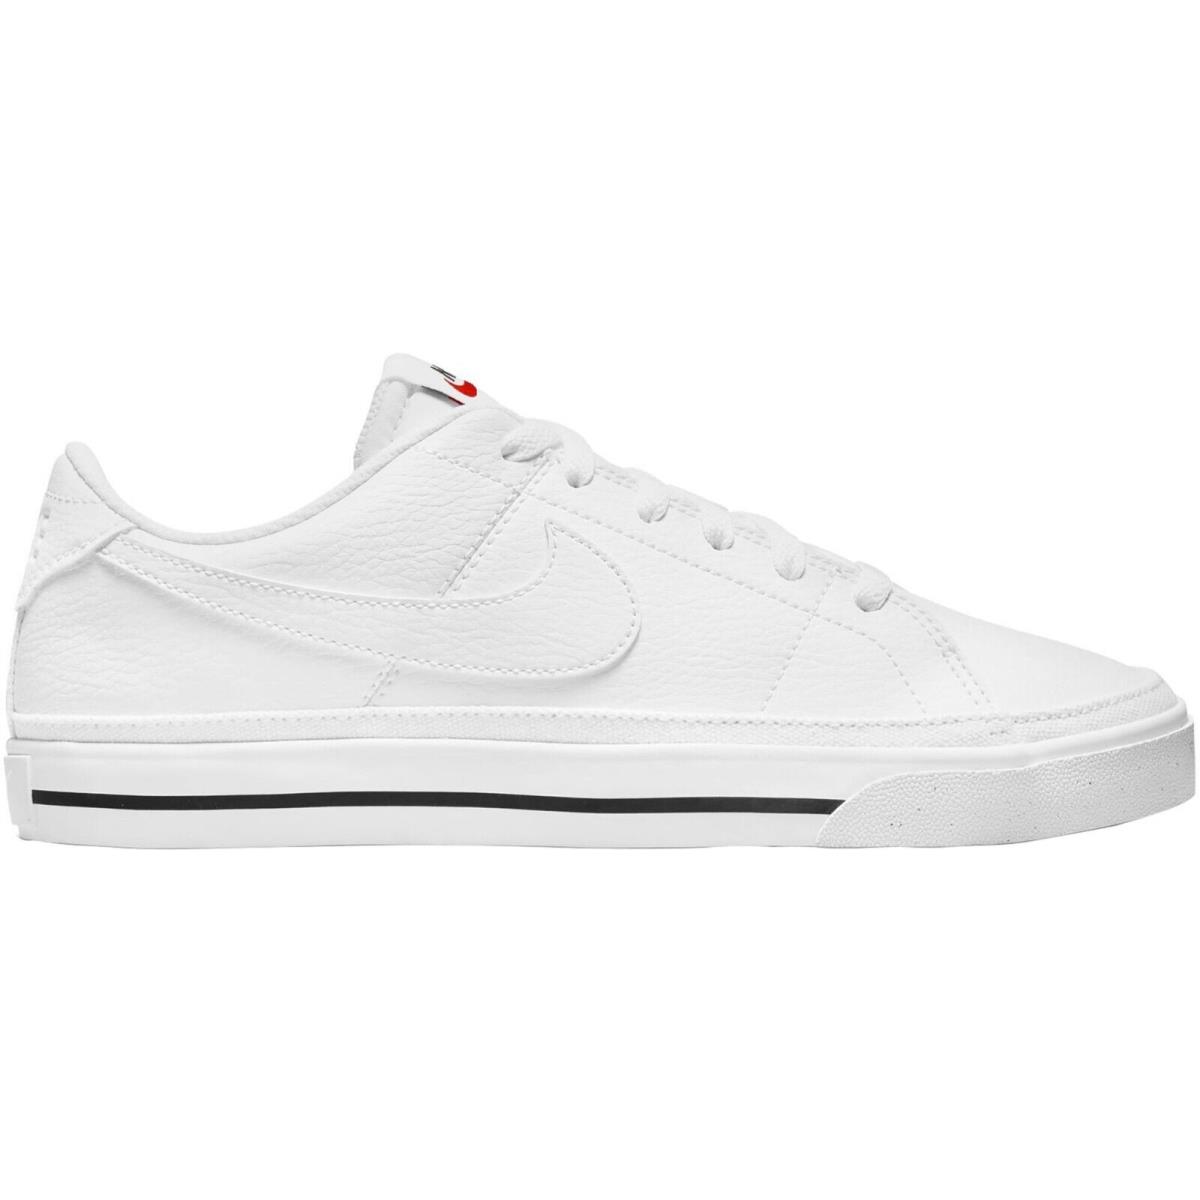 Nike Court Legacy Next Nature Women`s Casual Shoes All Colors US Sizes 6-11 White/Black/Volt/White